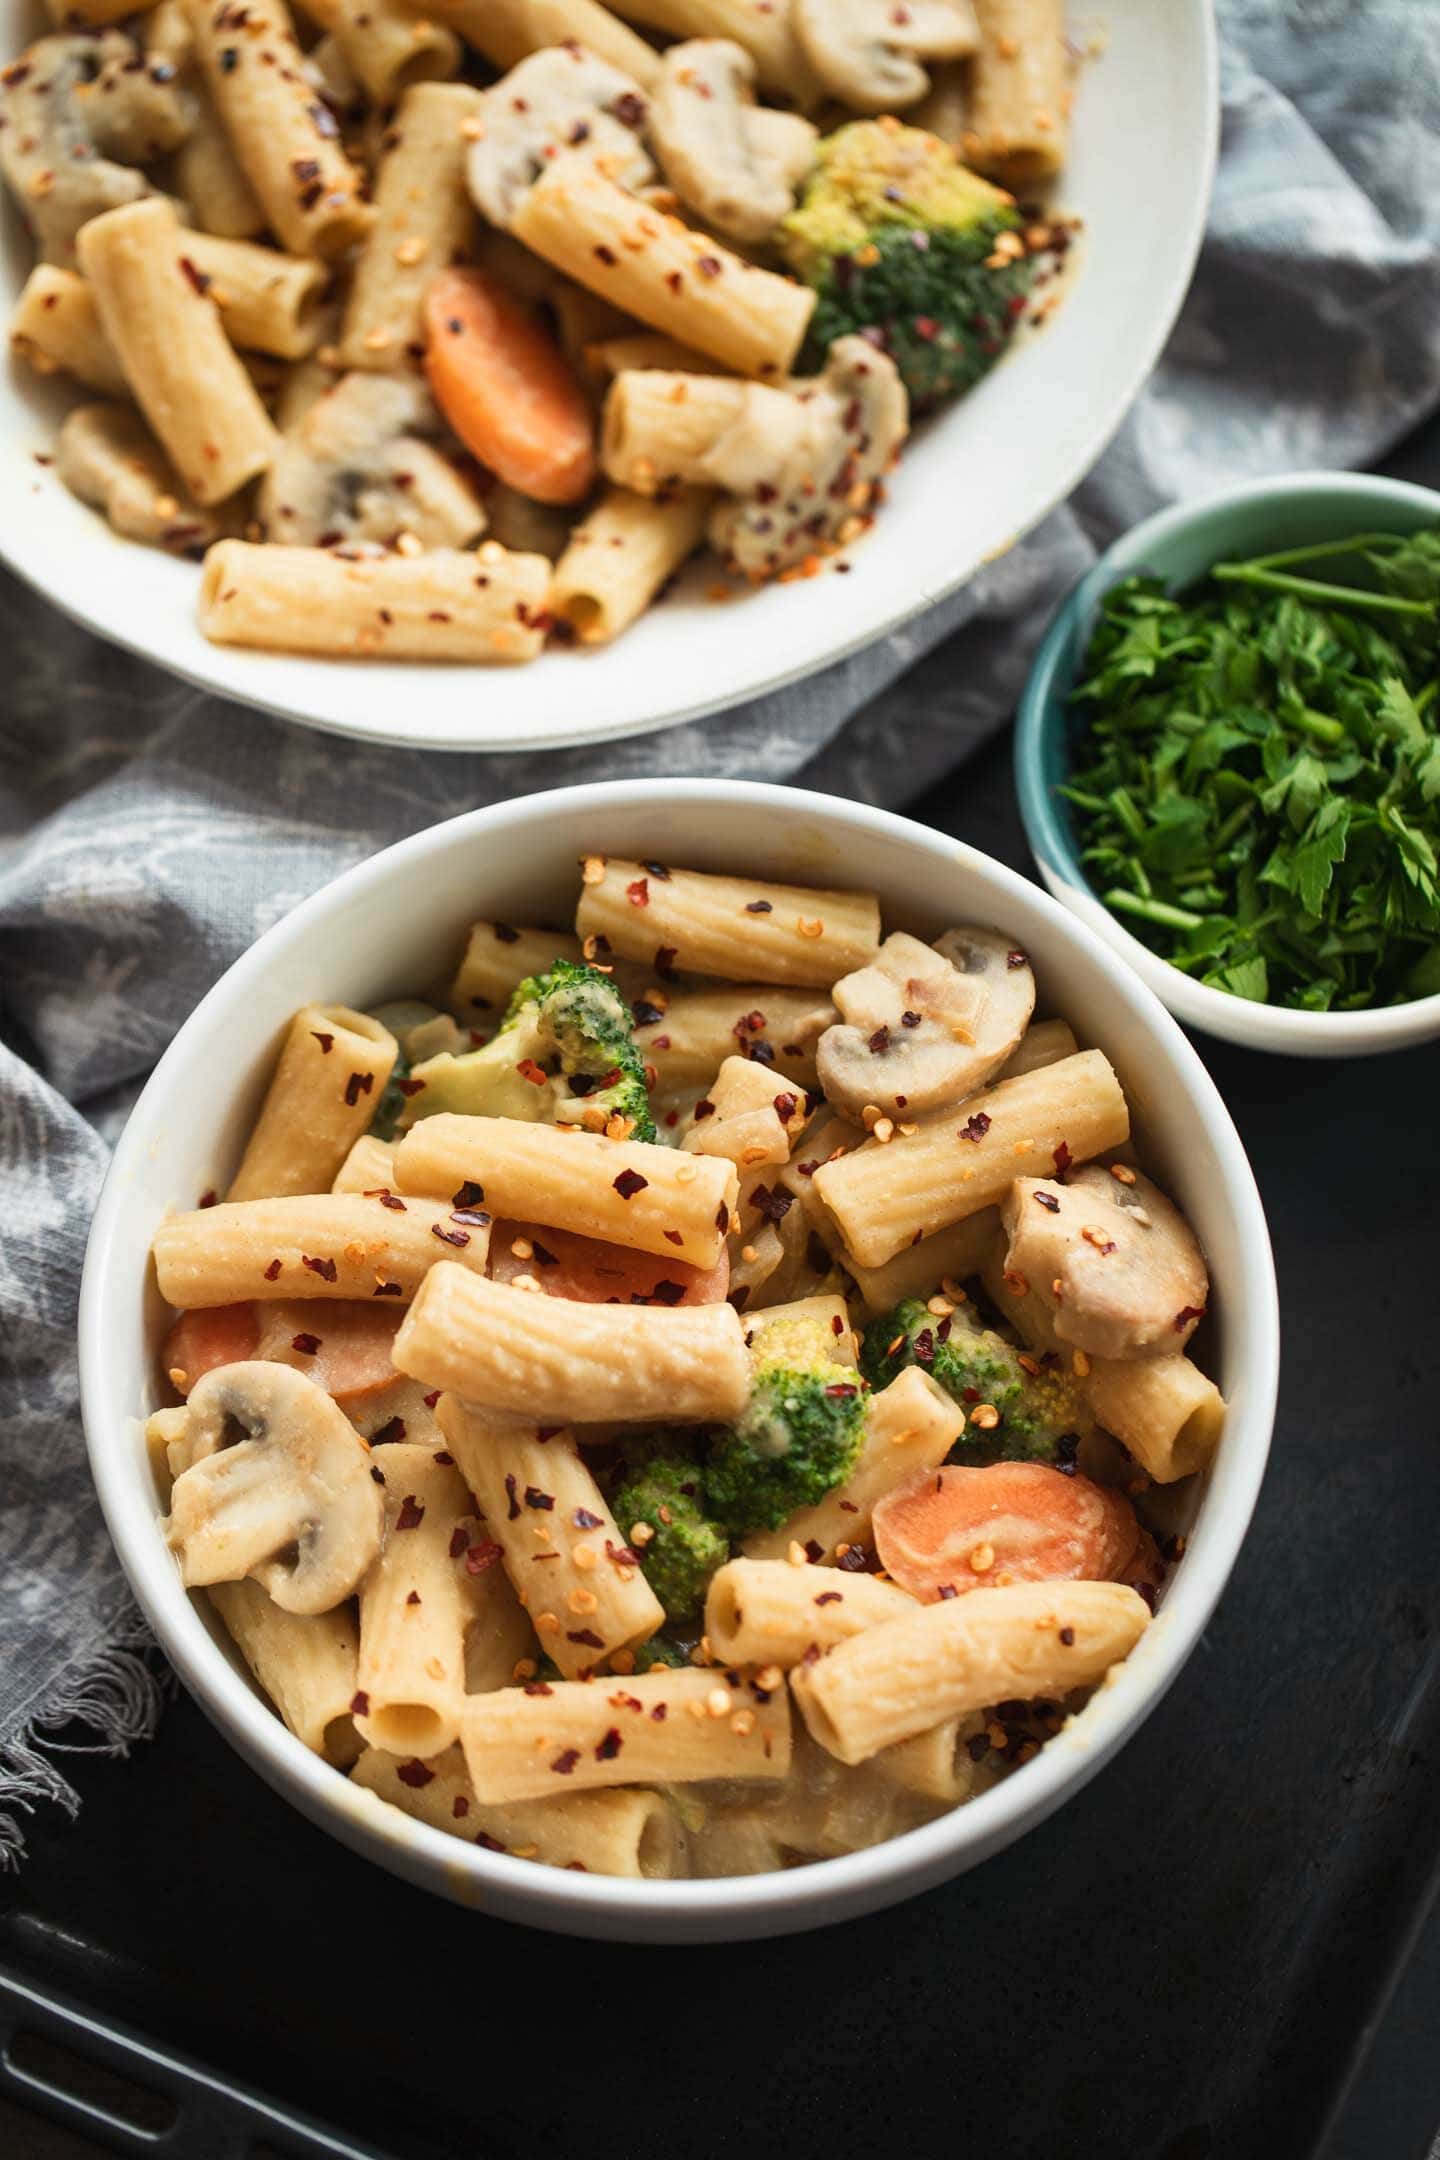 Two bowls of vegan pasta with broccoli, vegetables and a creamy sauce